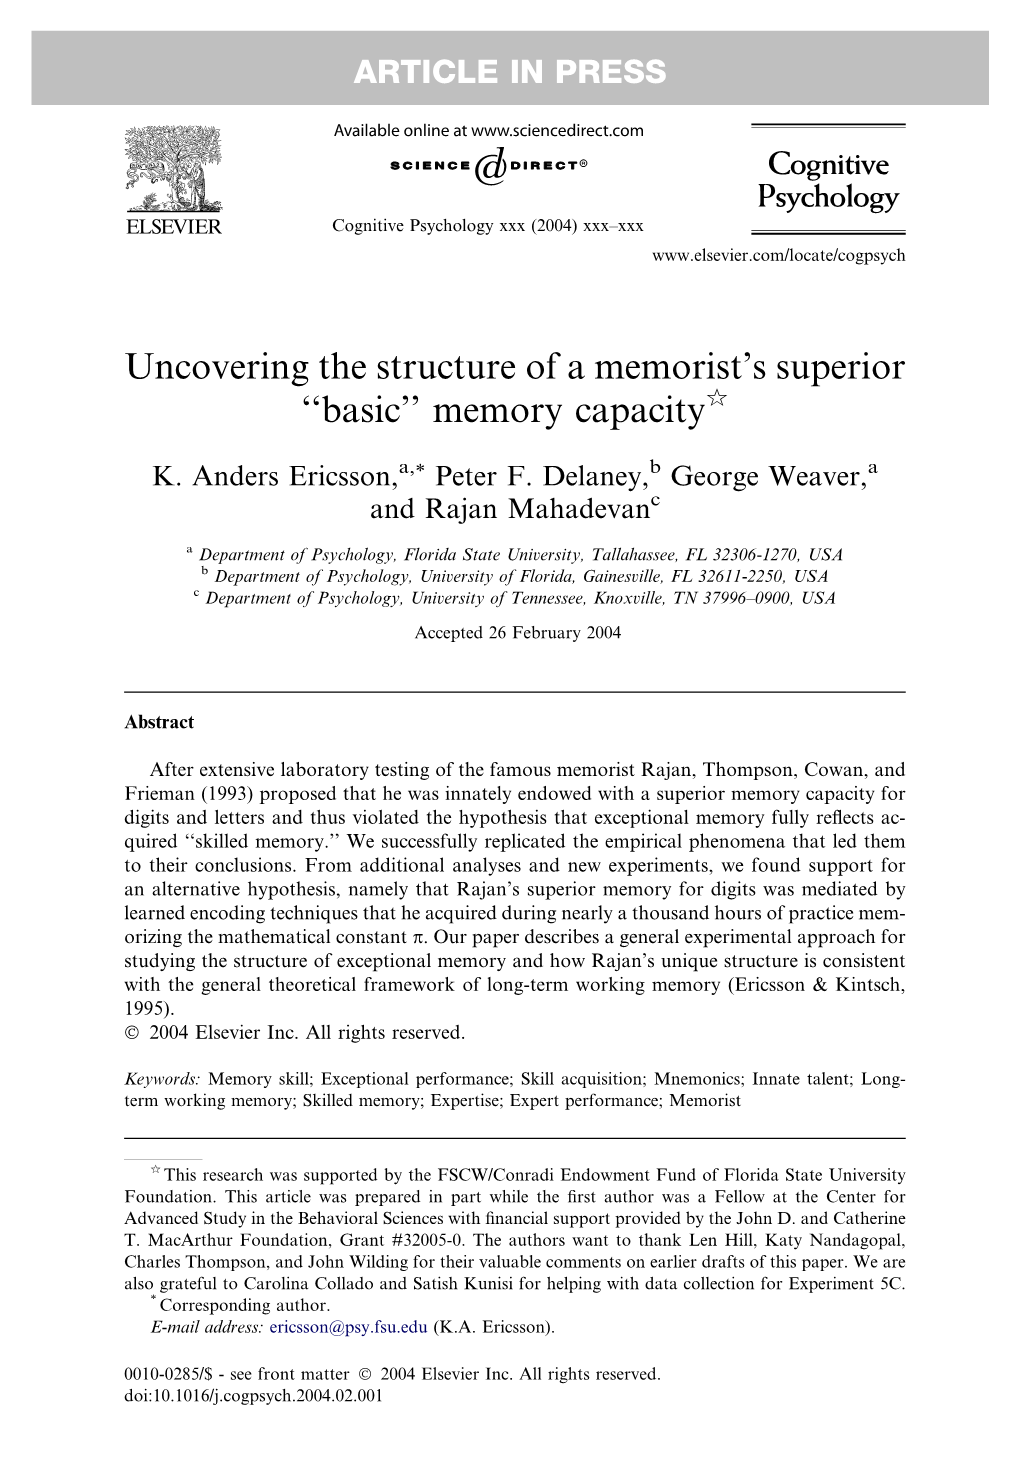 Uncovering the Structure of a Memorist's Superior ''Basic'' Memory